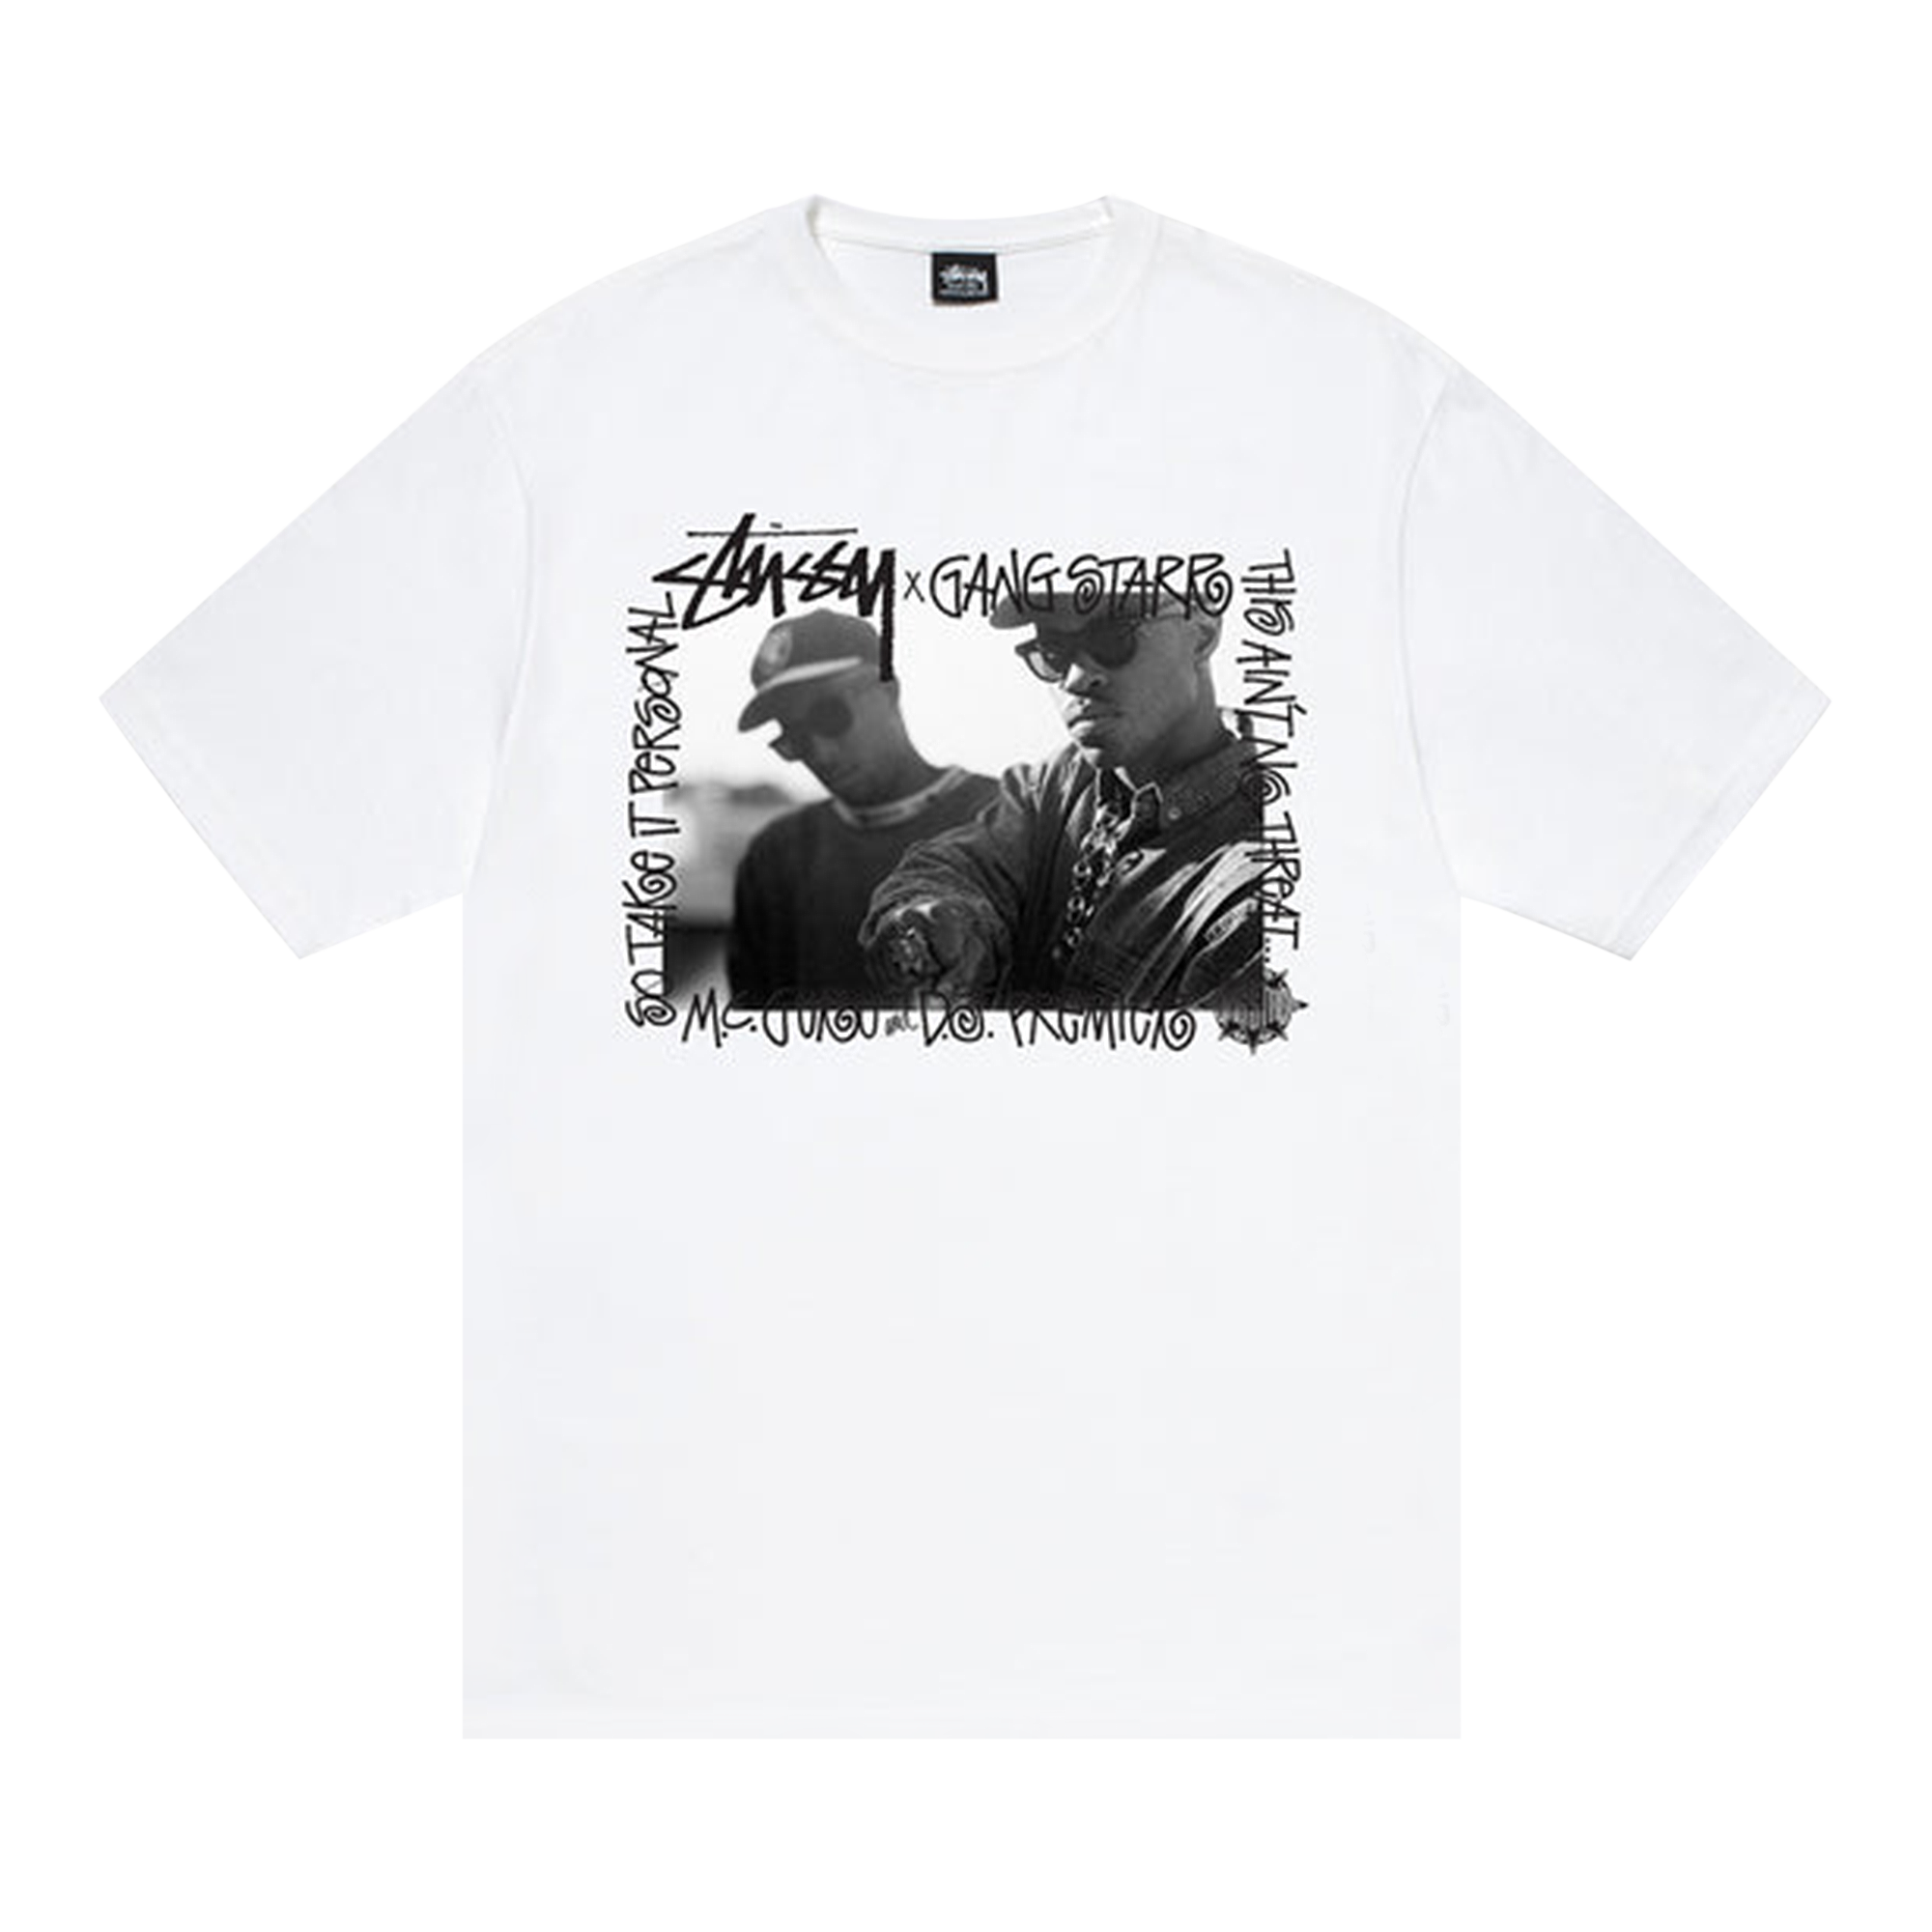 Pre-owned Stussy Gang Starr Take It Personal Tee 'white'